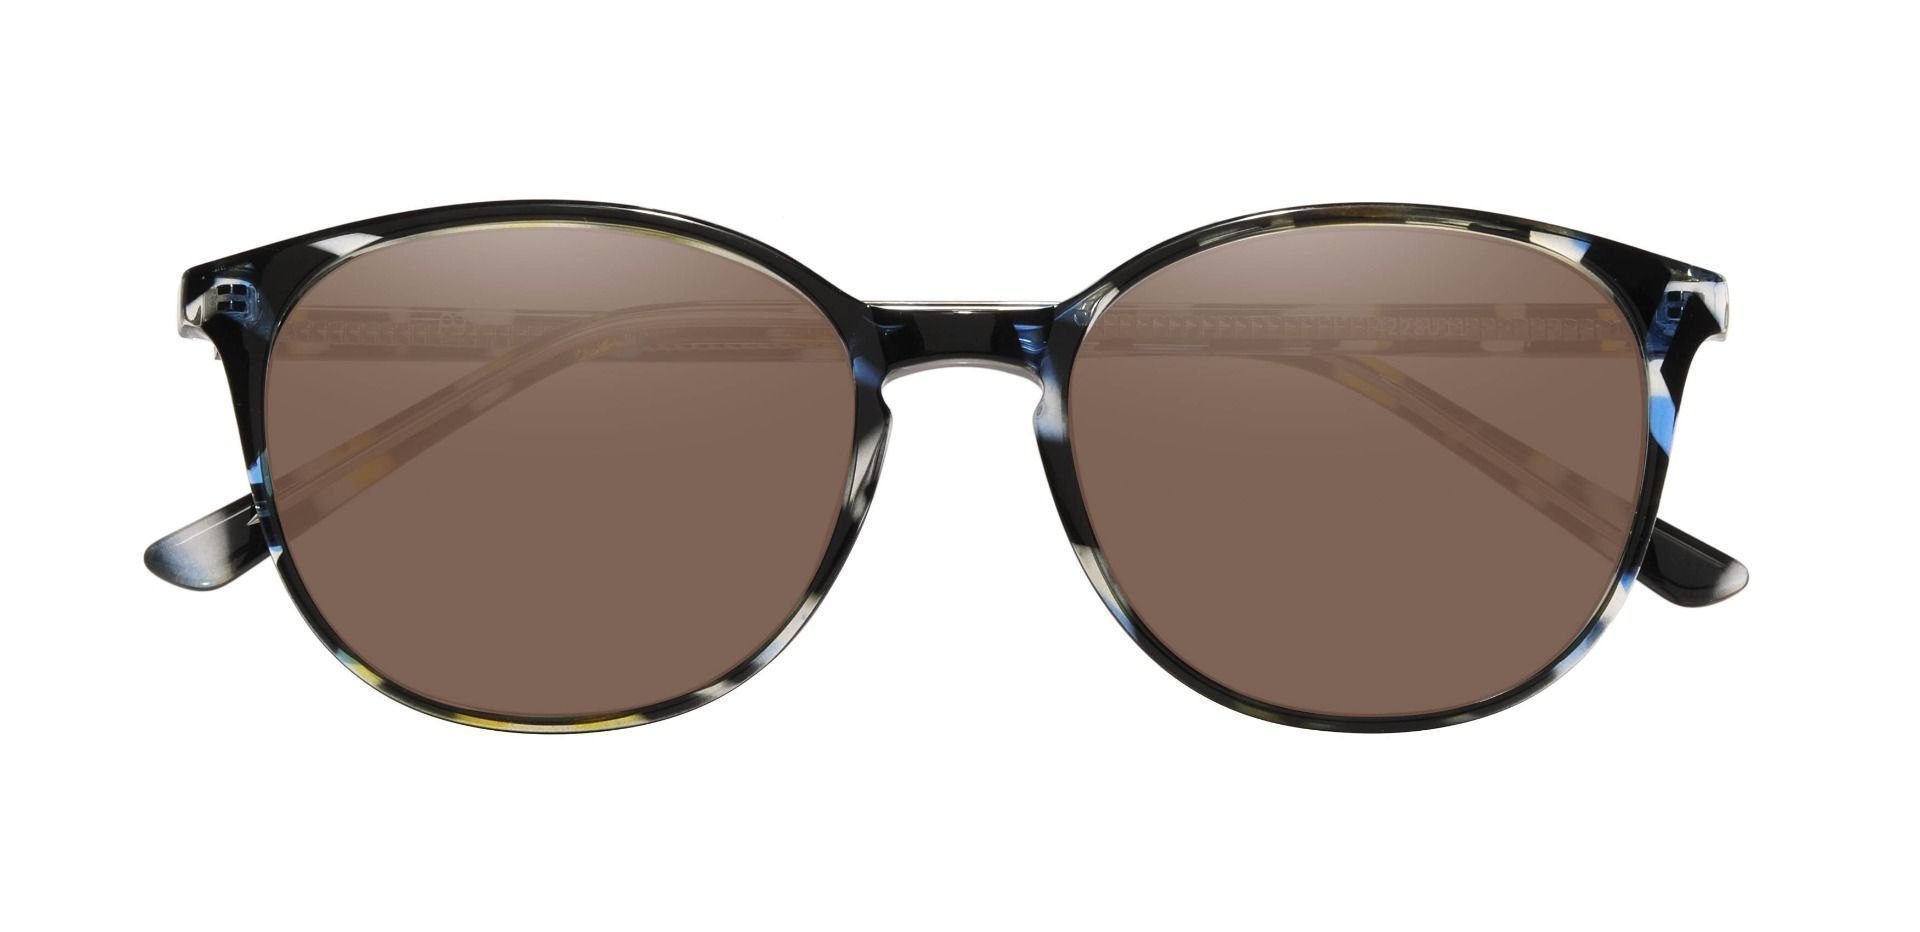 Shanley Oval Non-Rx Sunglasses - Multi Color Frame With Brown Lenses